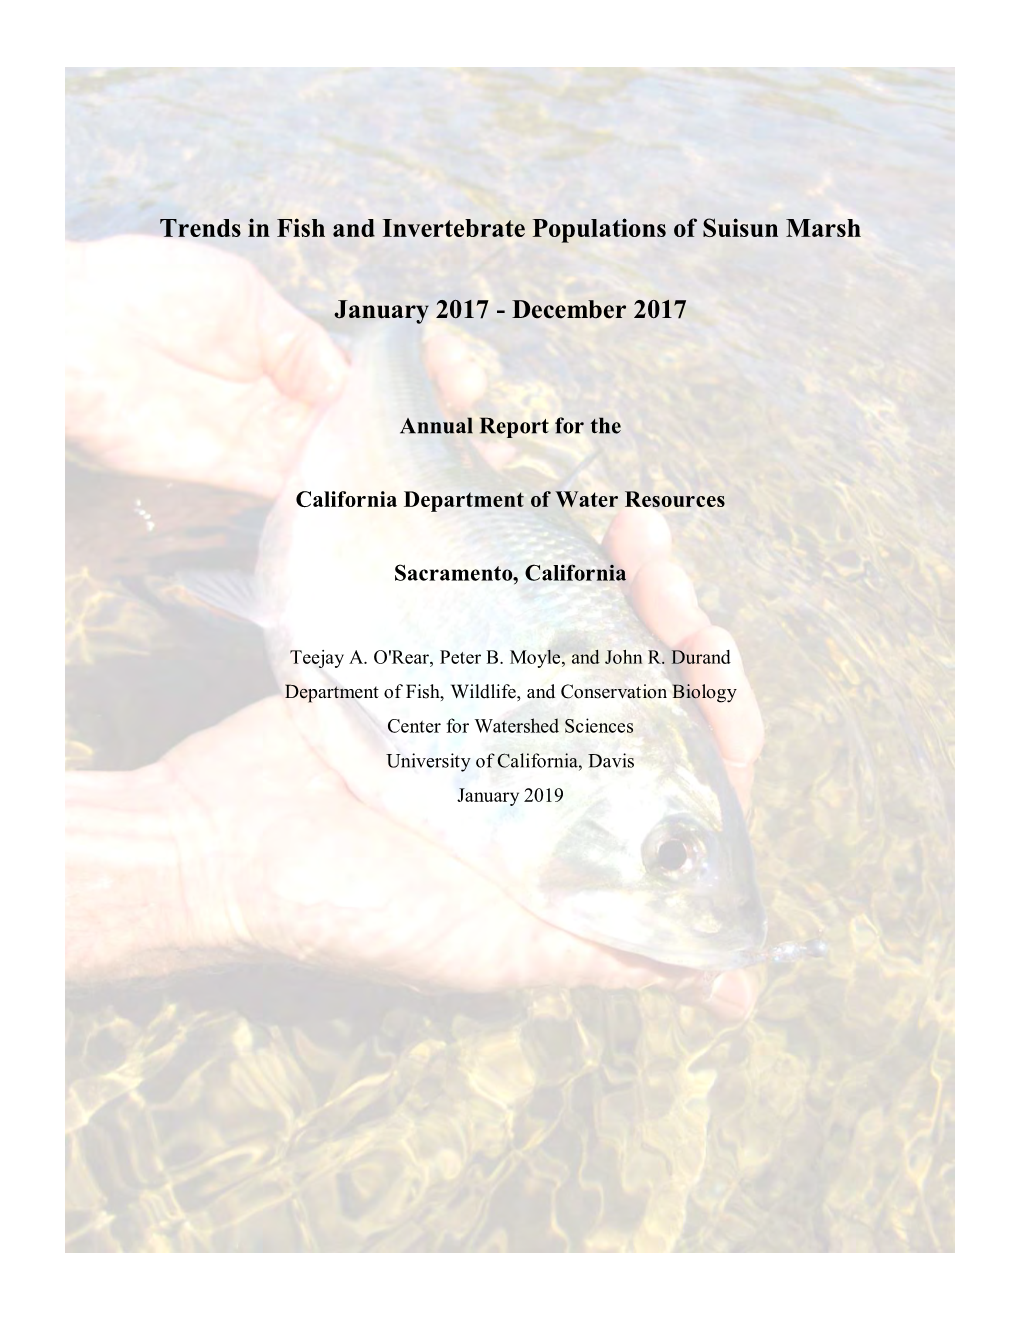 Trends in Fish and Invertebrate Populations of Suisun Marsh January 2017